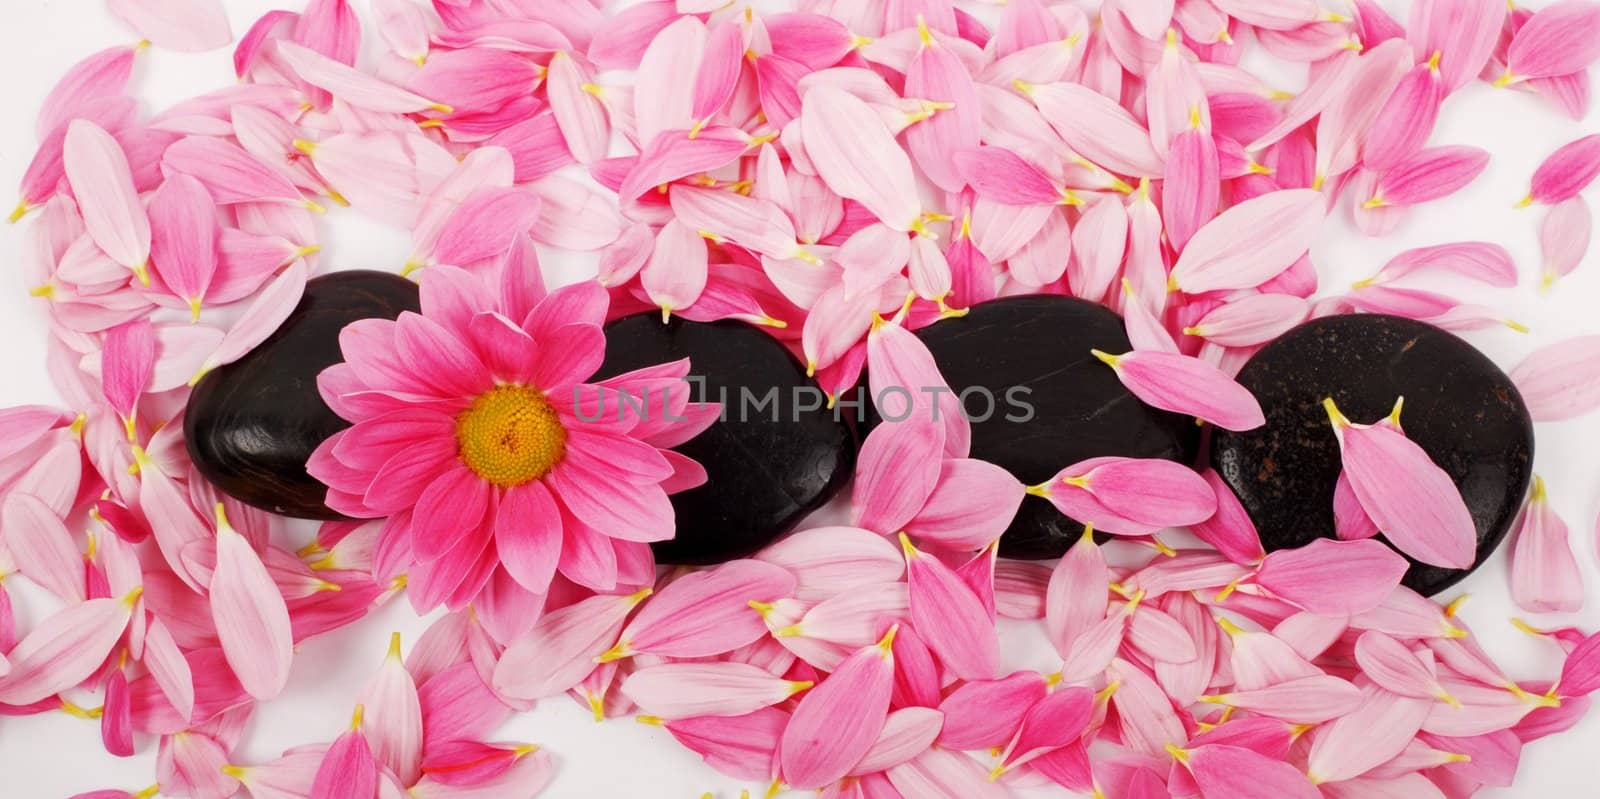 Pink petals and black stones for SPA